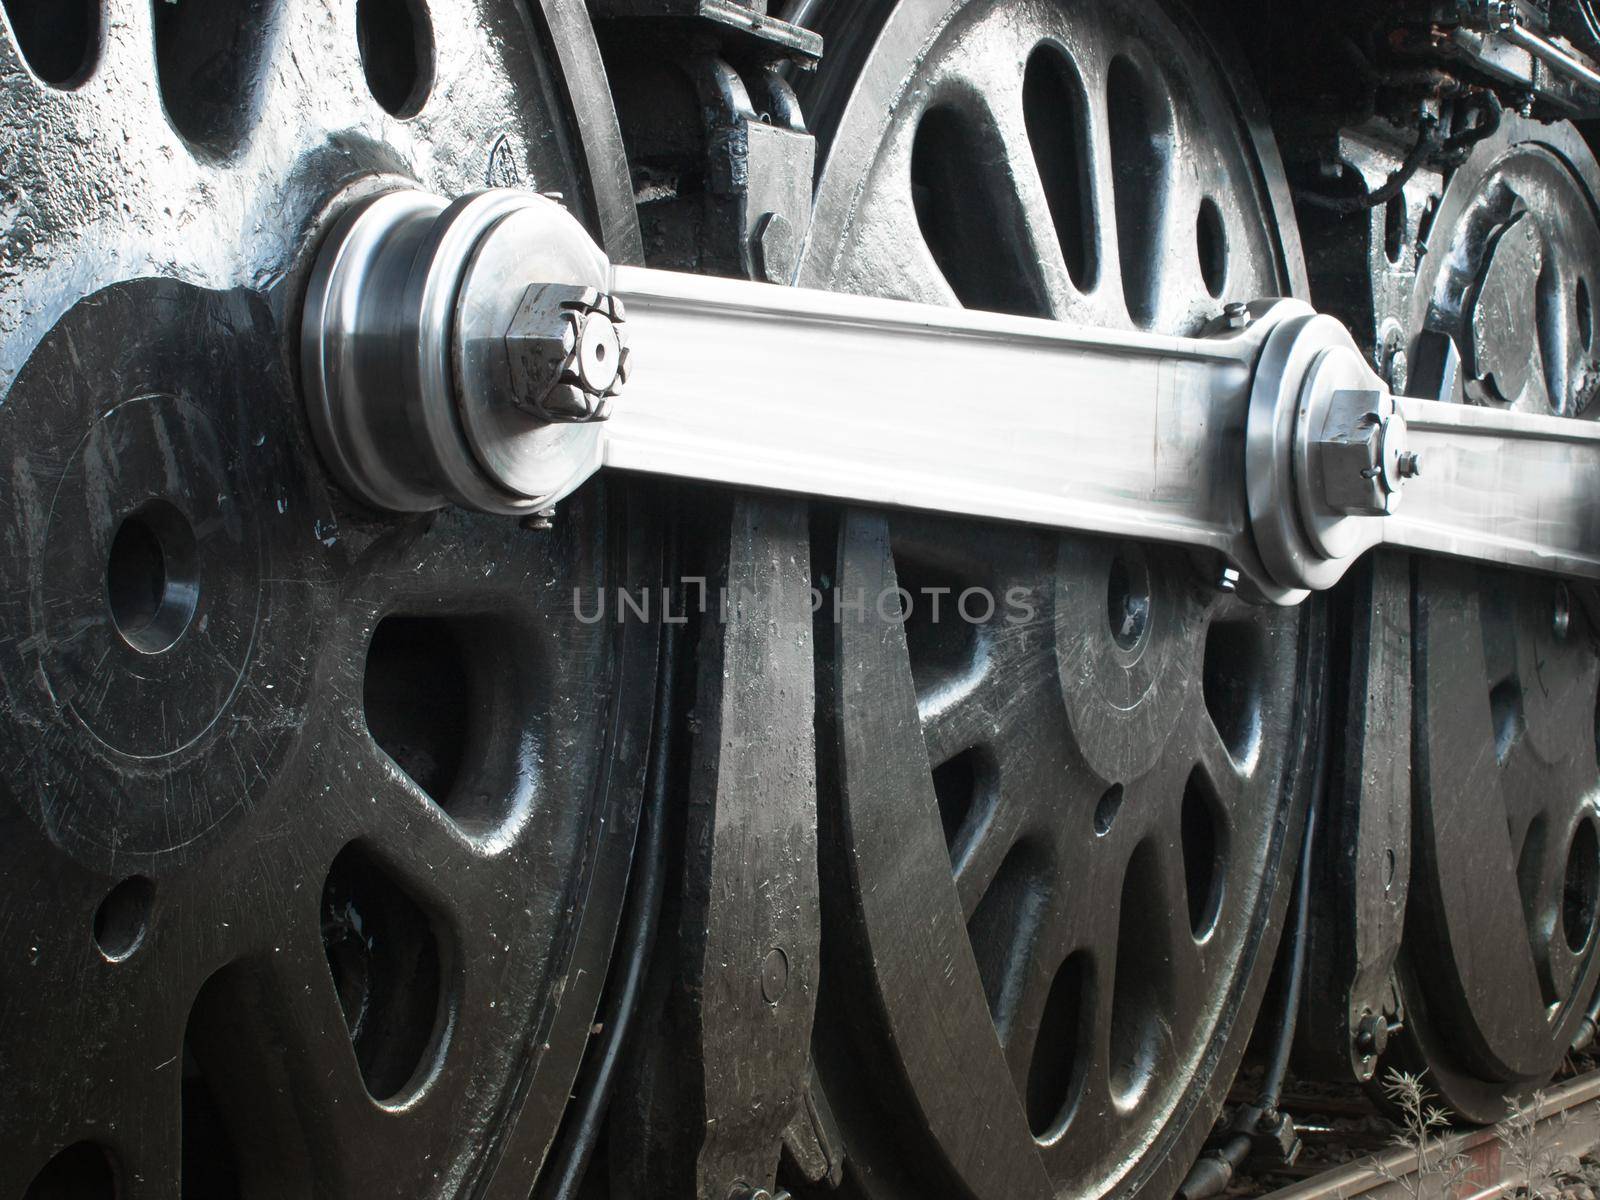 Driving wheels of the steam locomotive No. 844 of Union Pacific Railroad.